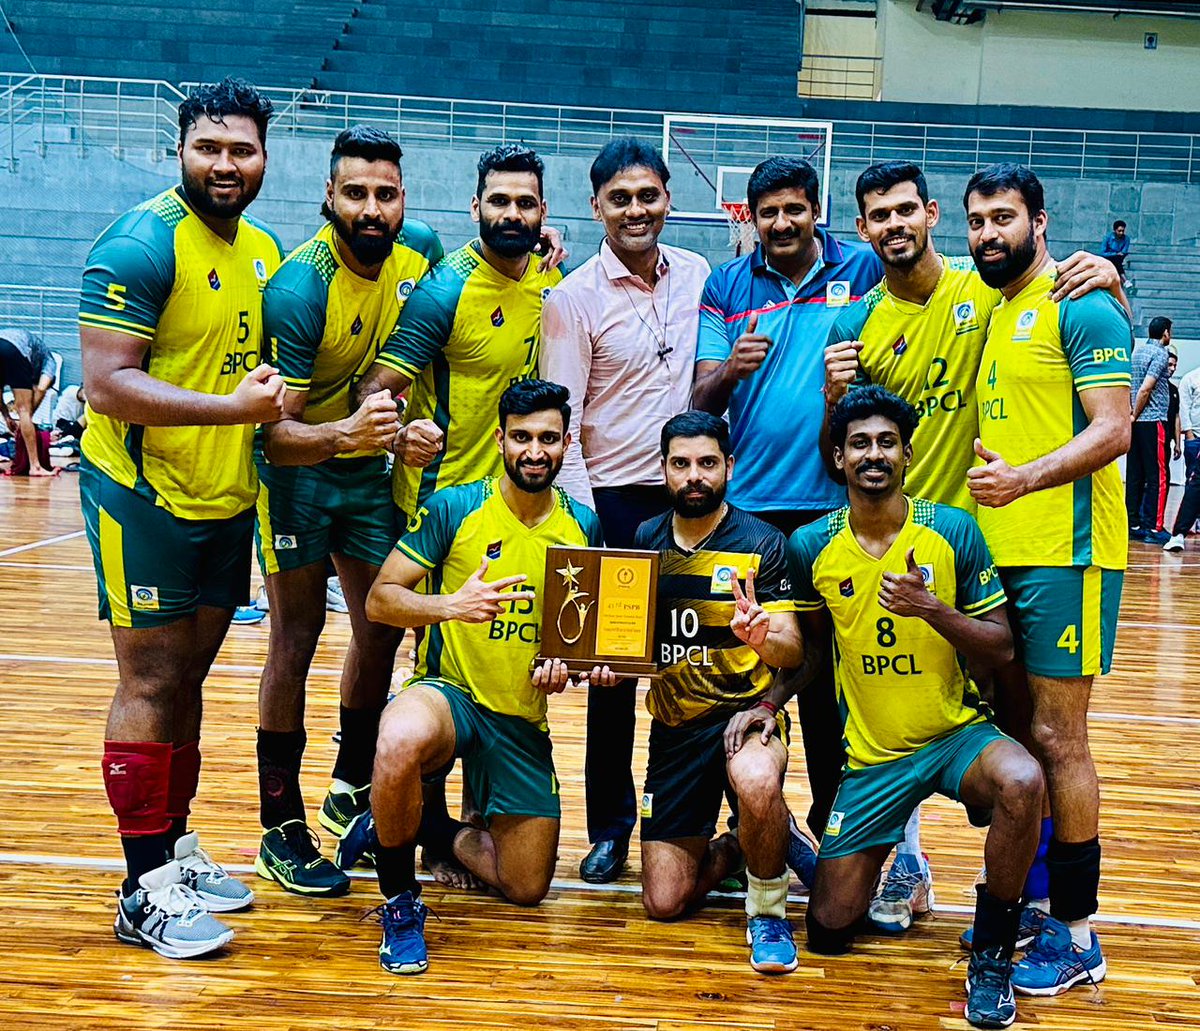 #BPCL wins the 43rd #PSPB Inter Petroleum #Volleyball tournament. In the finals BPCL crafted the smashing victory with a straight 3-set win over #ONGC. (Scores : 25- 22, 25 - 20 and 25-18 ).